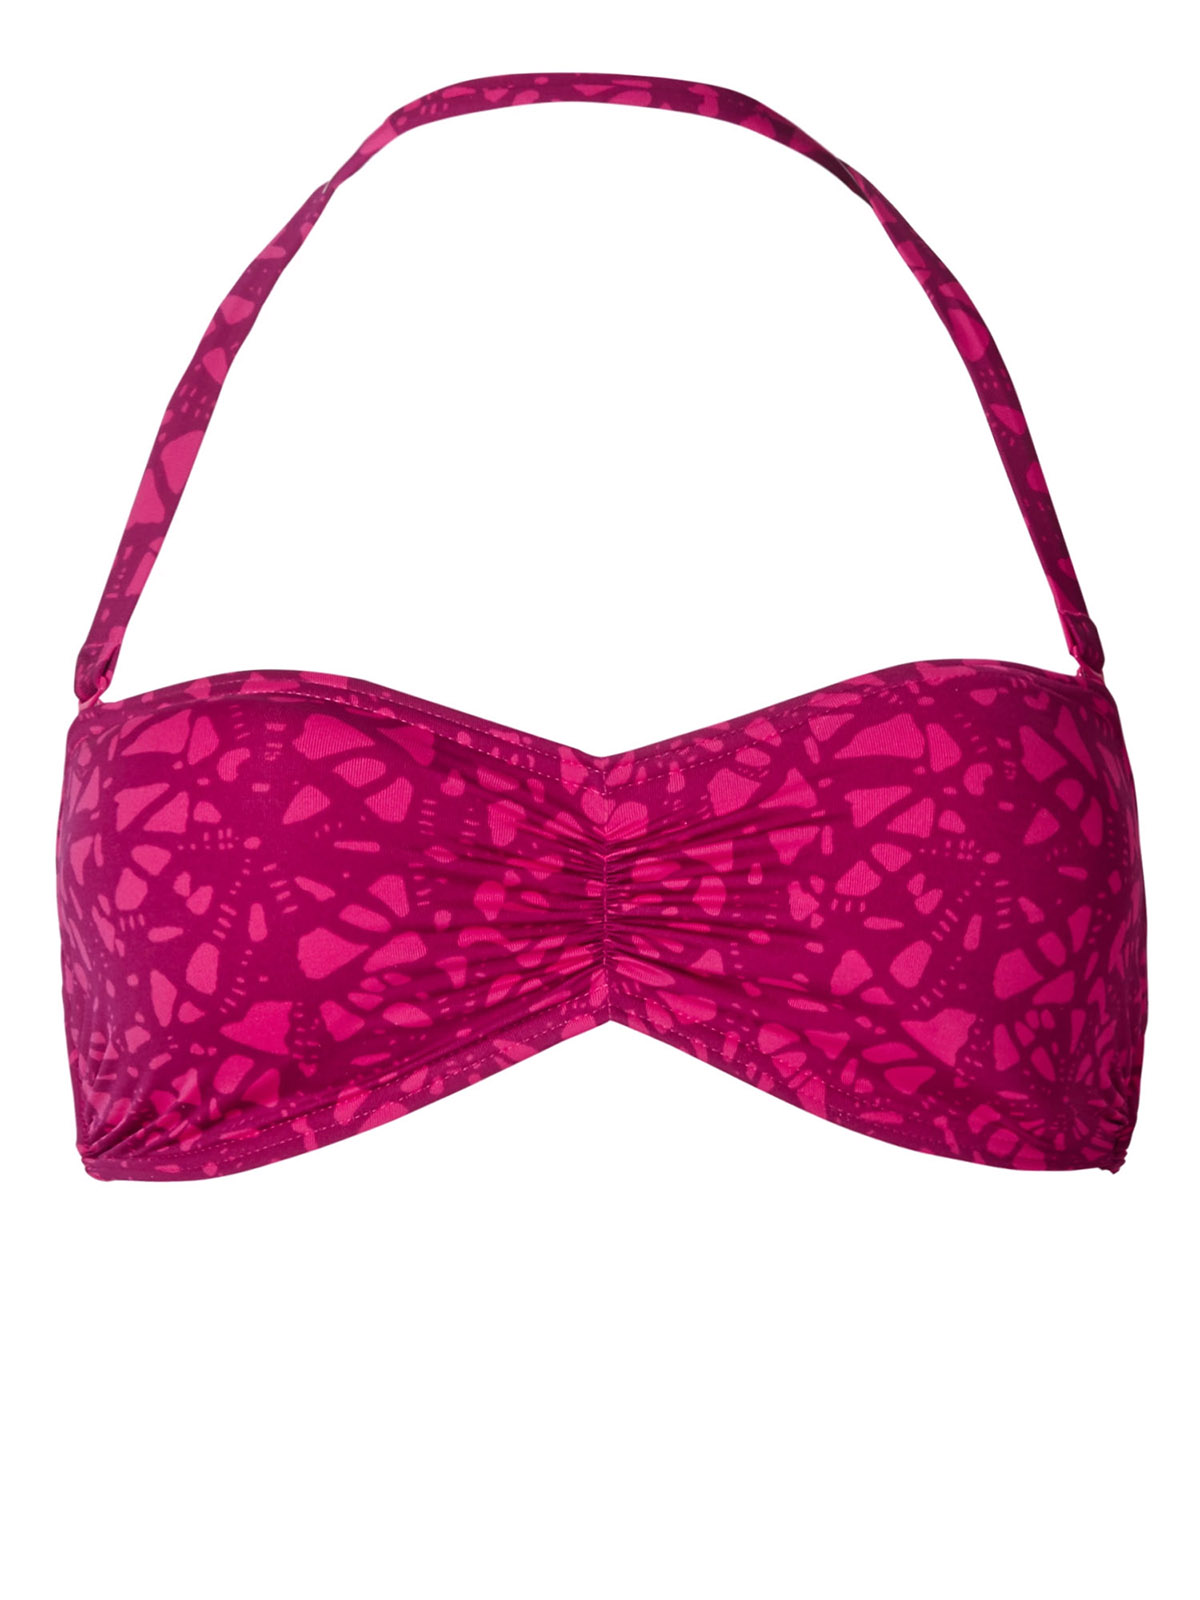 Marks and Spencer - - M&5 PINK Padded Bandeau Bikini Top - Size 8 to 22